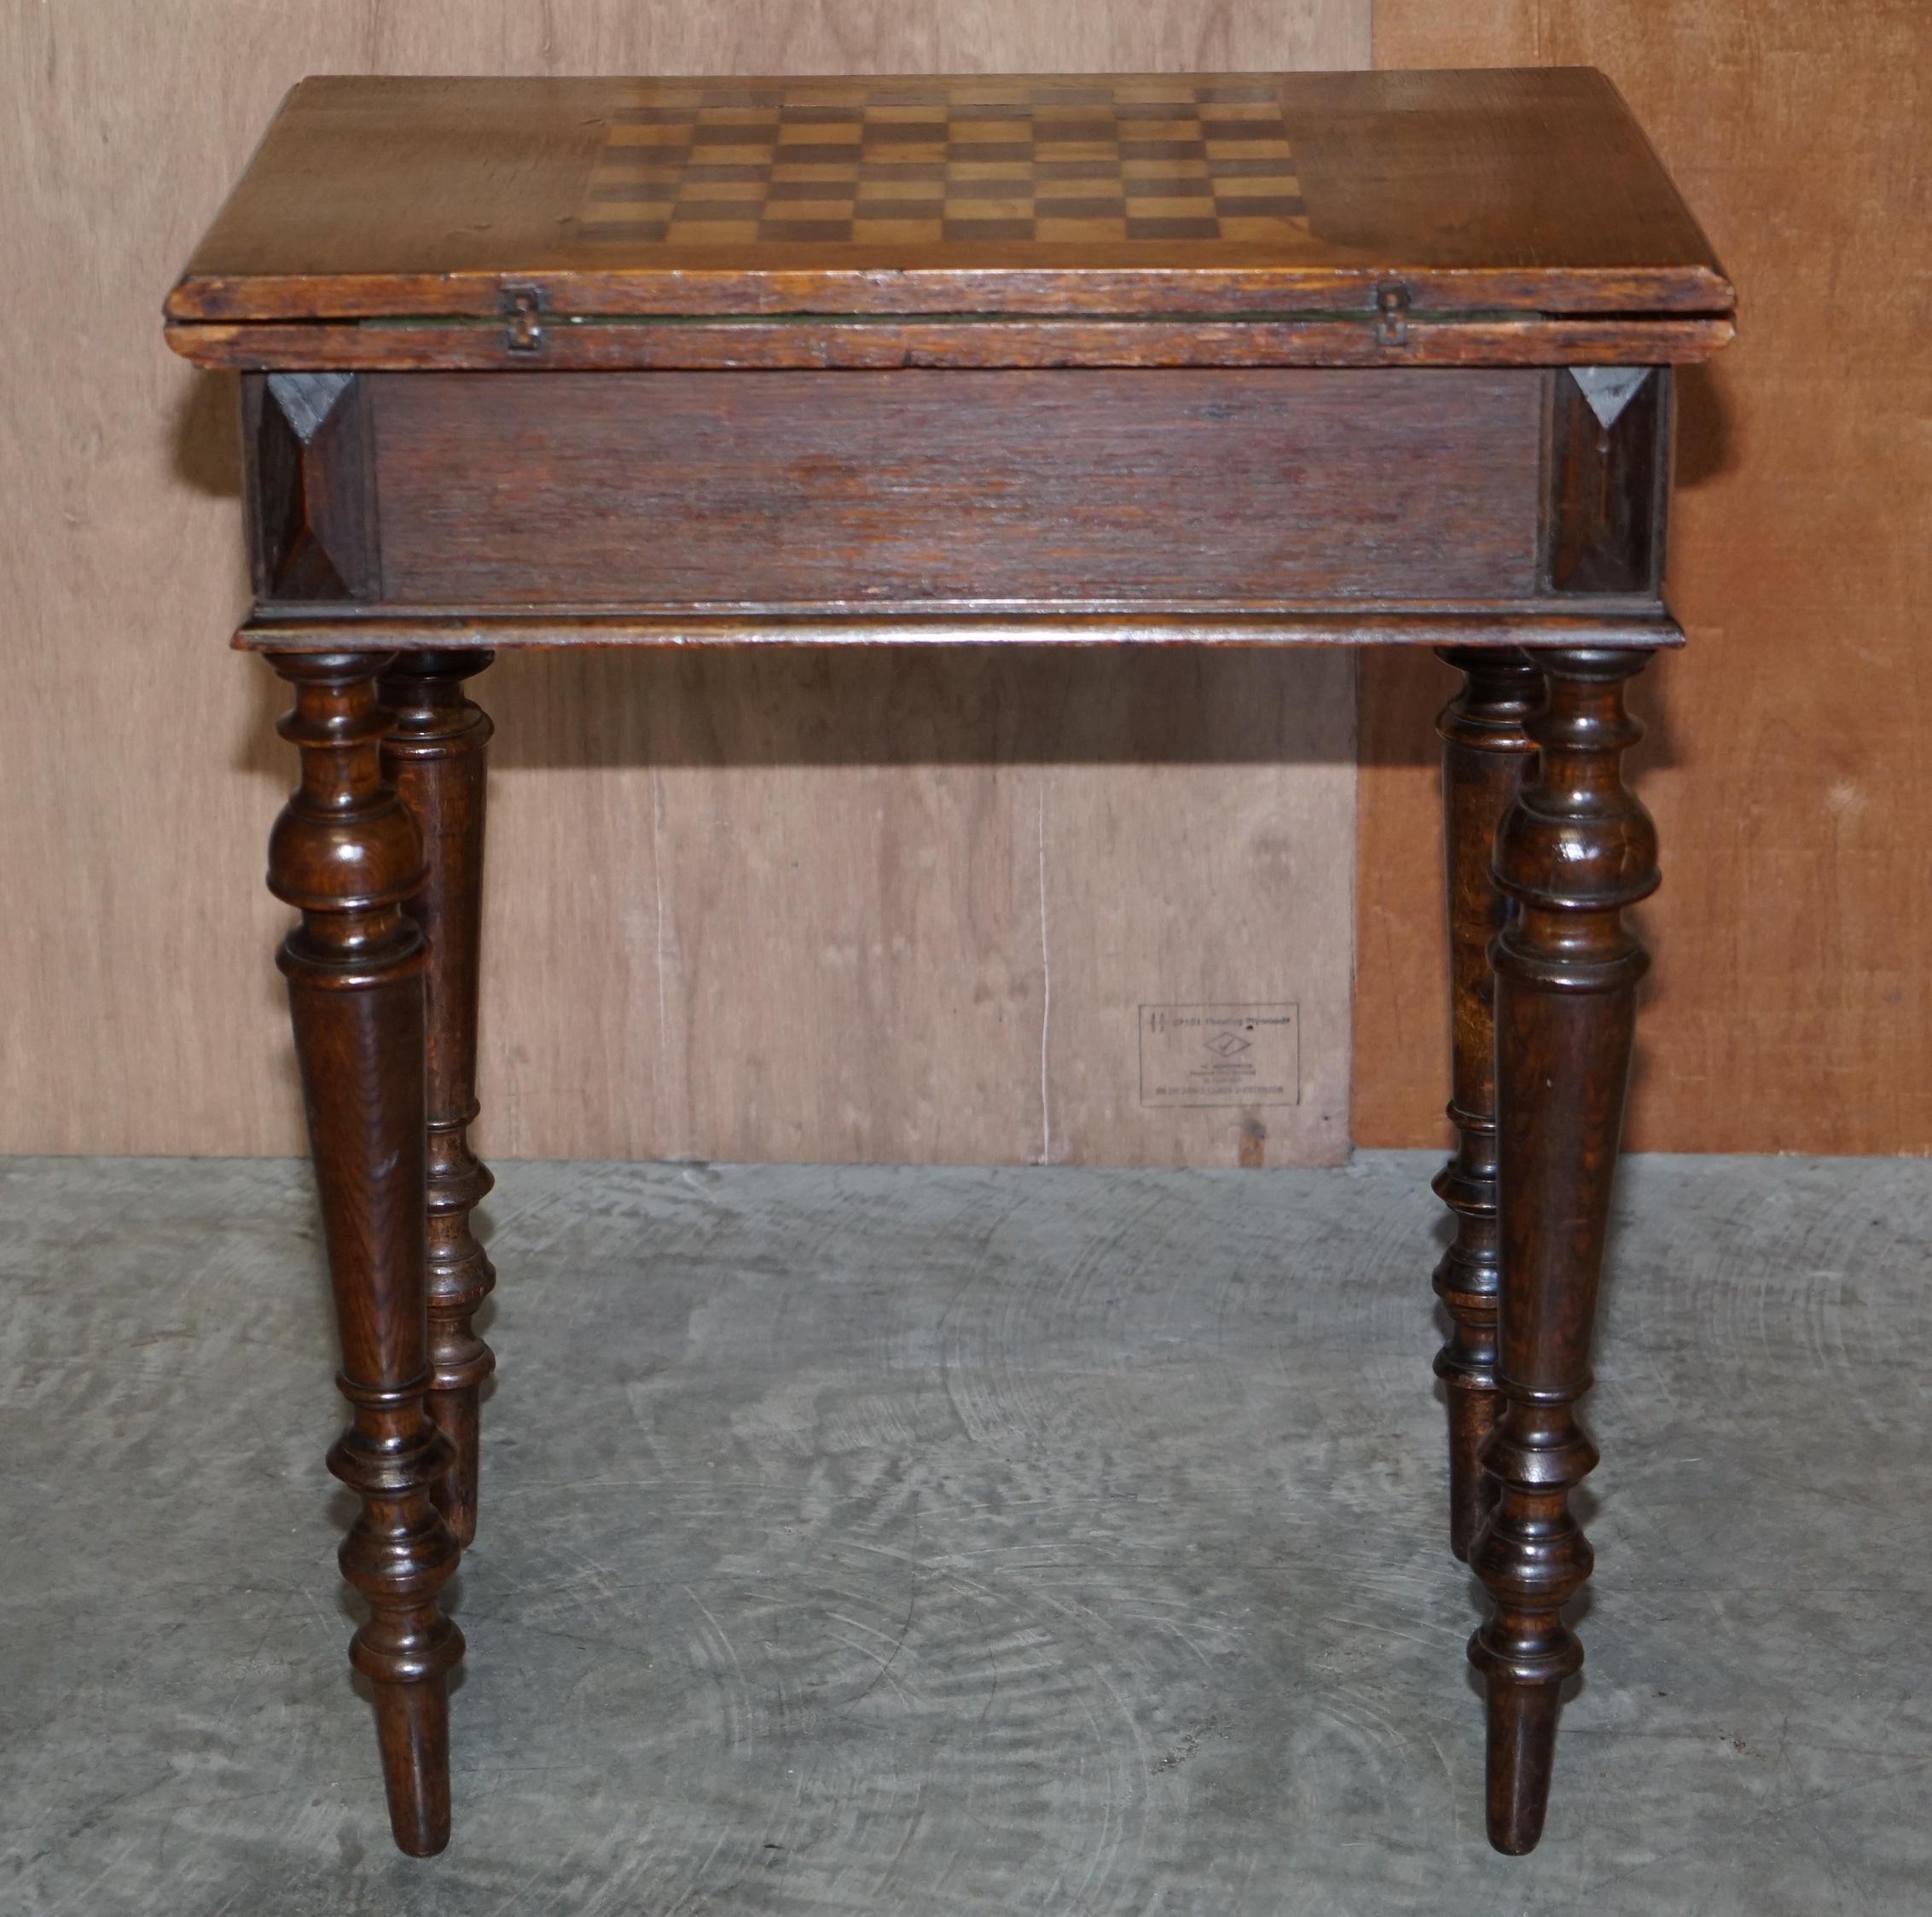 Lovely Antique Victrian circa 1880 Chess Games Table with Fold over Card Baize For Sale 8